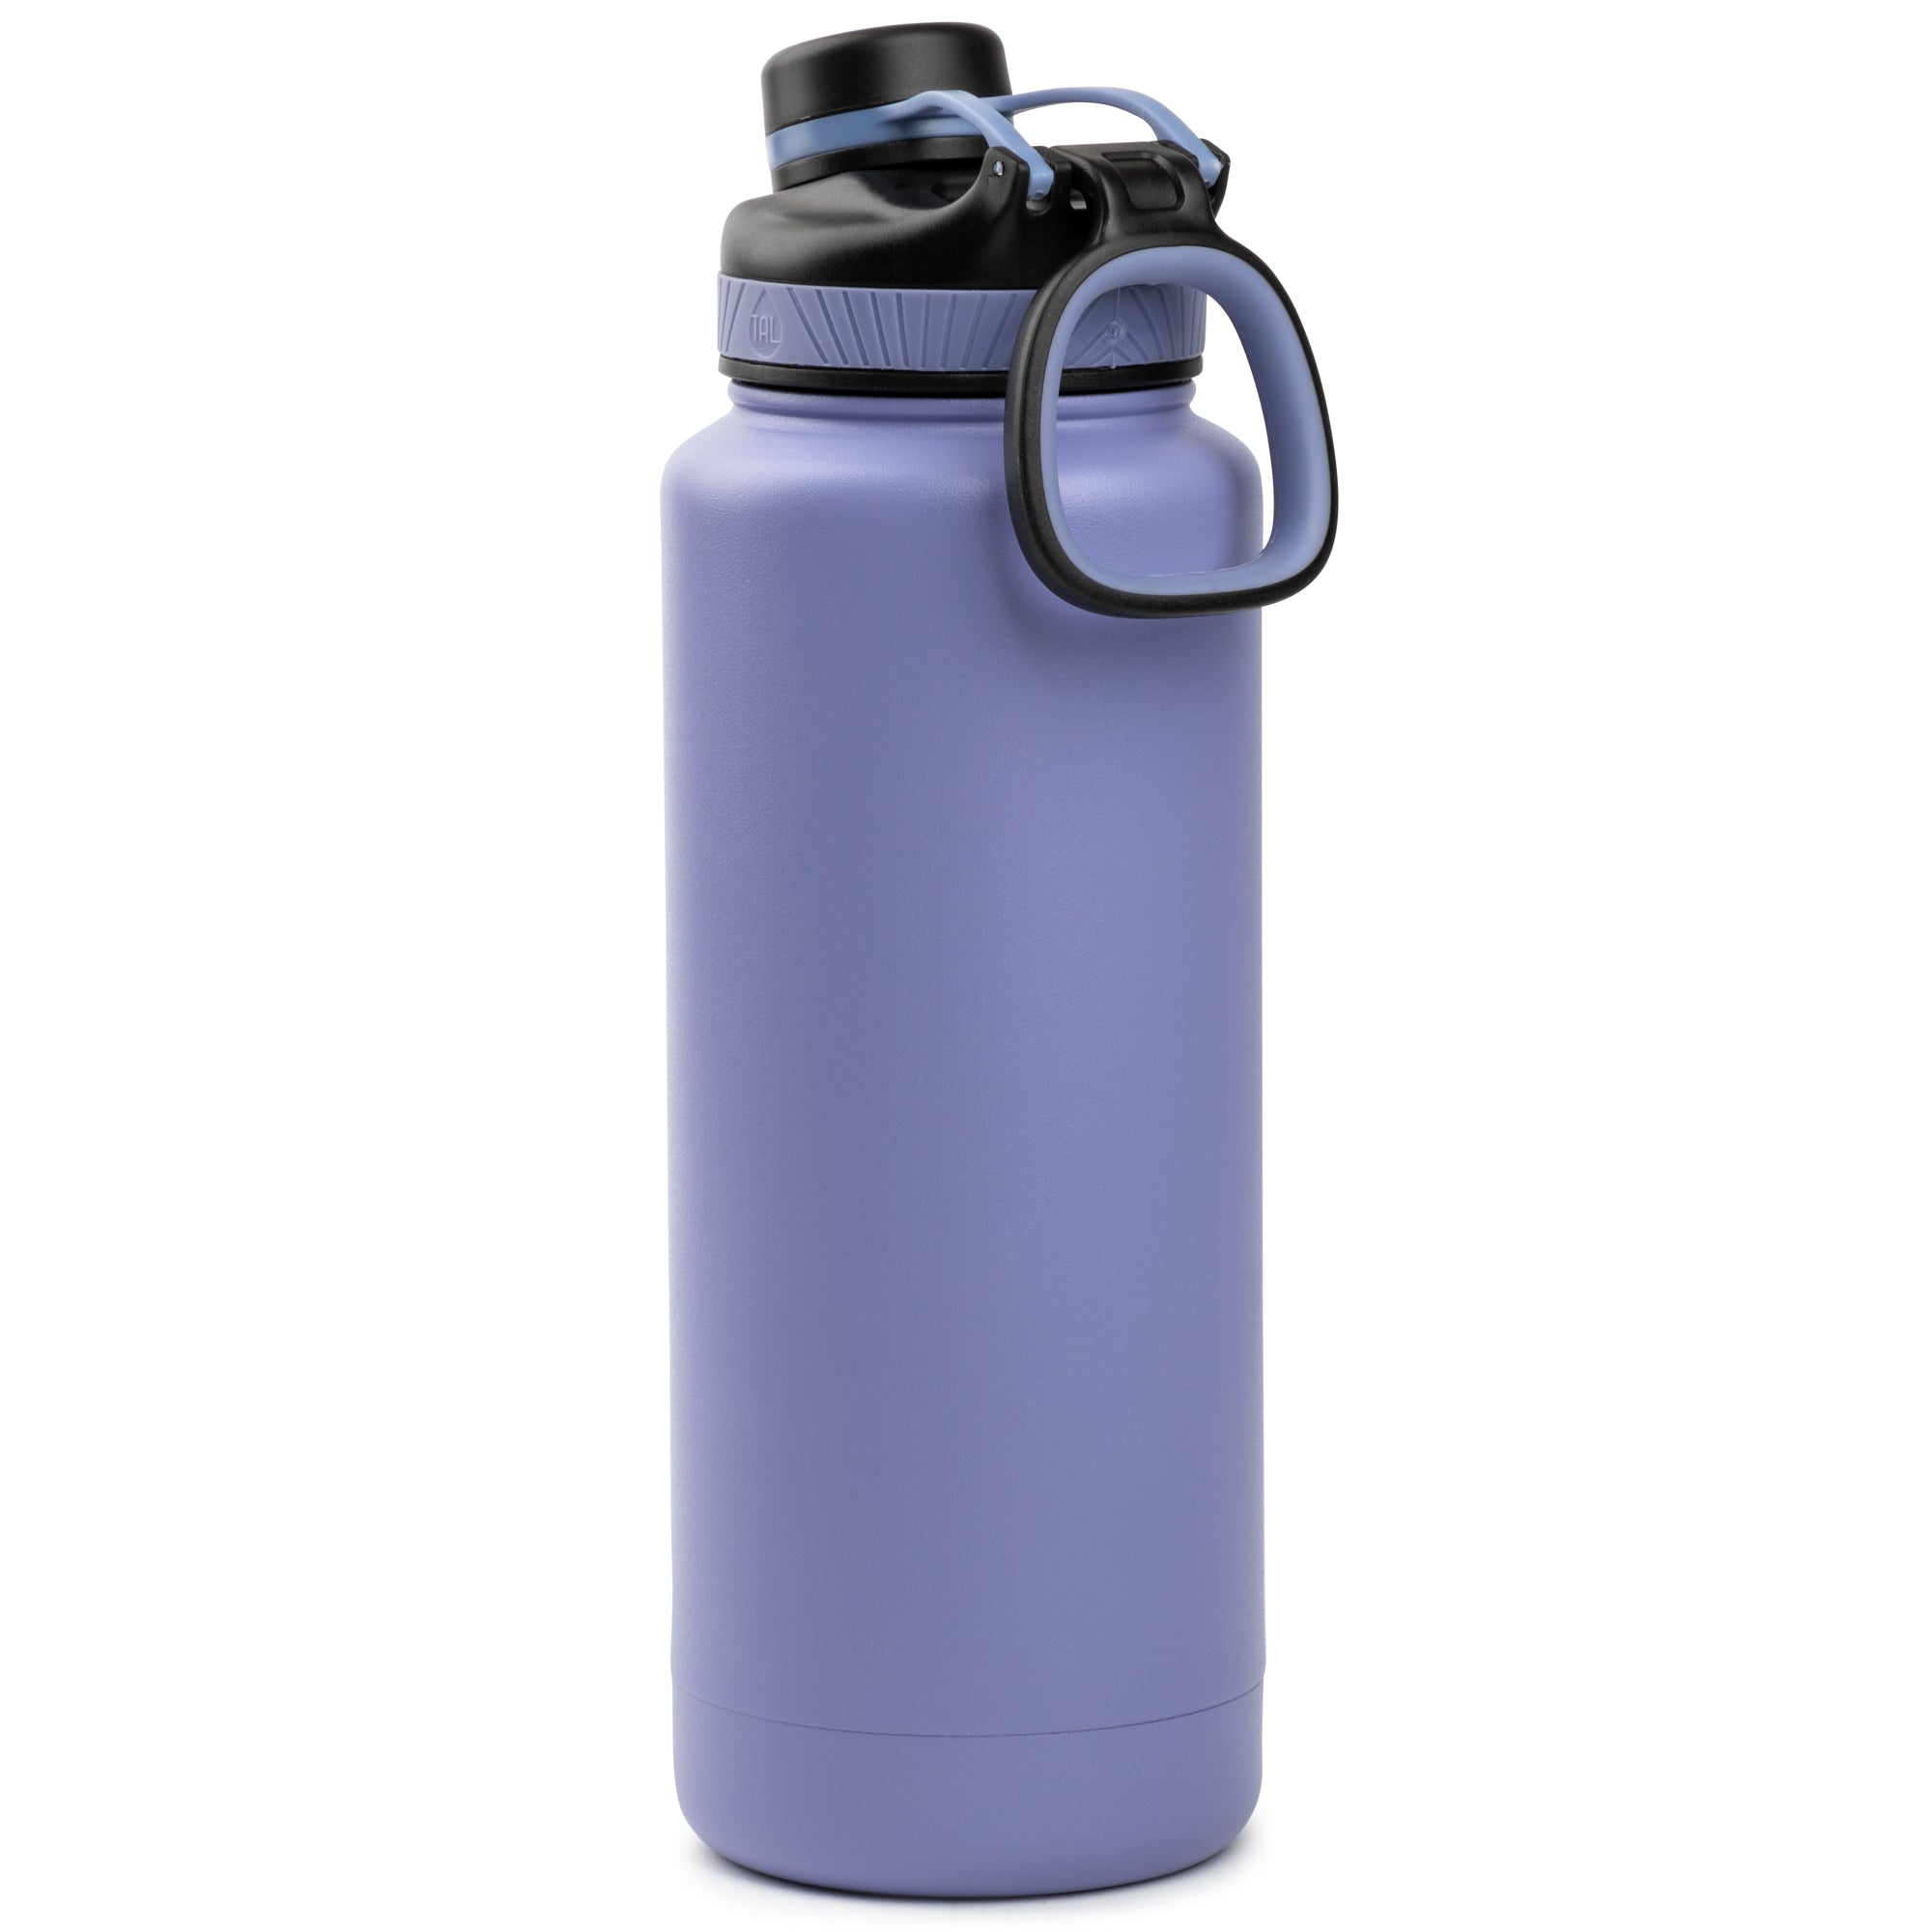 TAL Ranger 40 oz Navy and Black Insulated Stainless Steel Water Bottle with  Wide Mouth and Flip-Top Lid